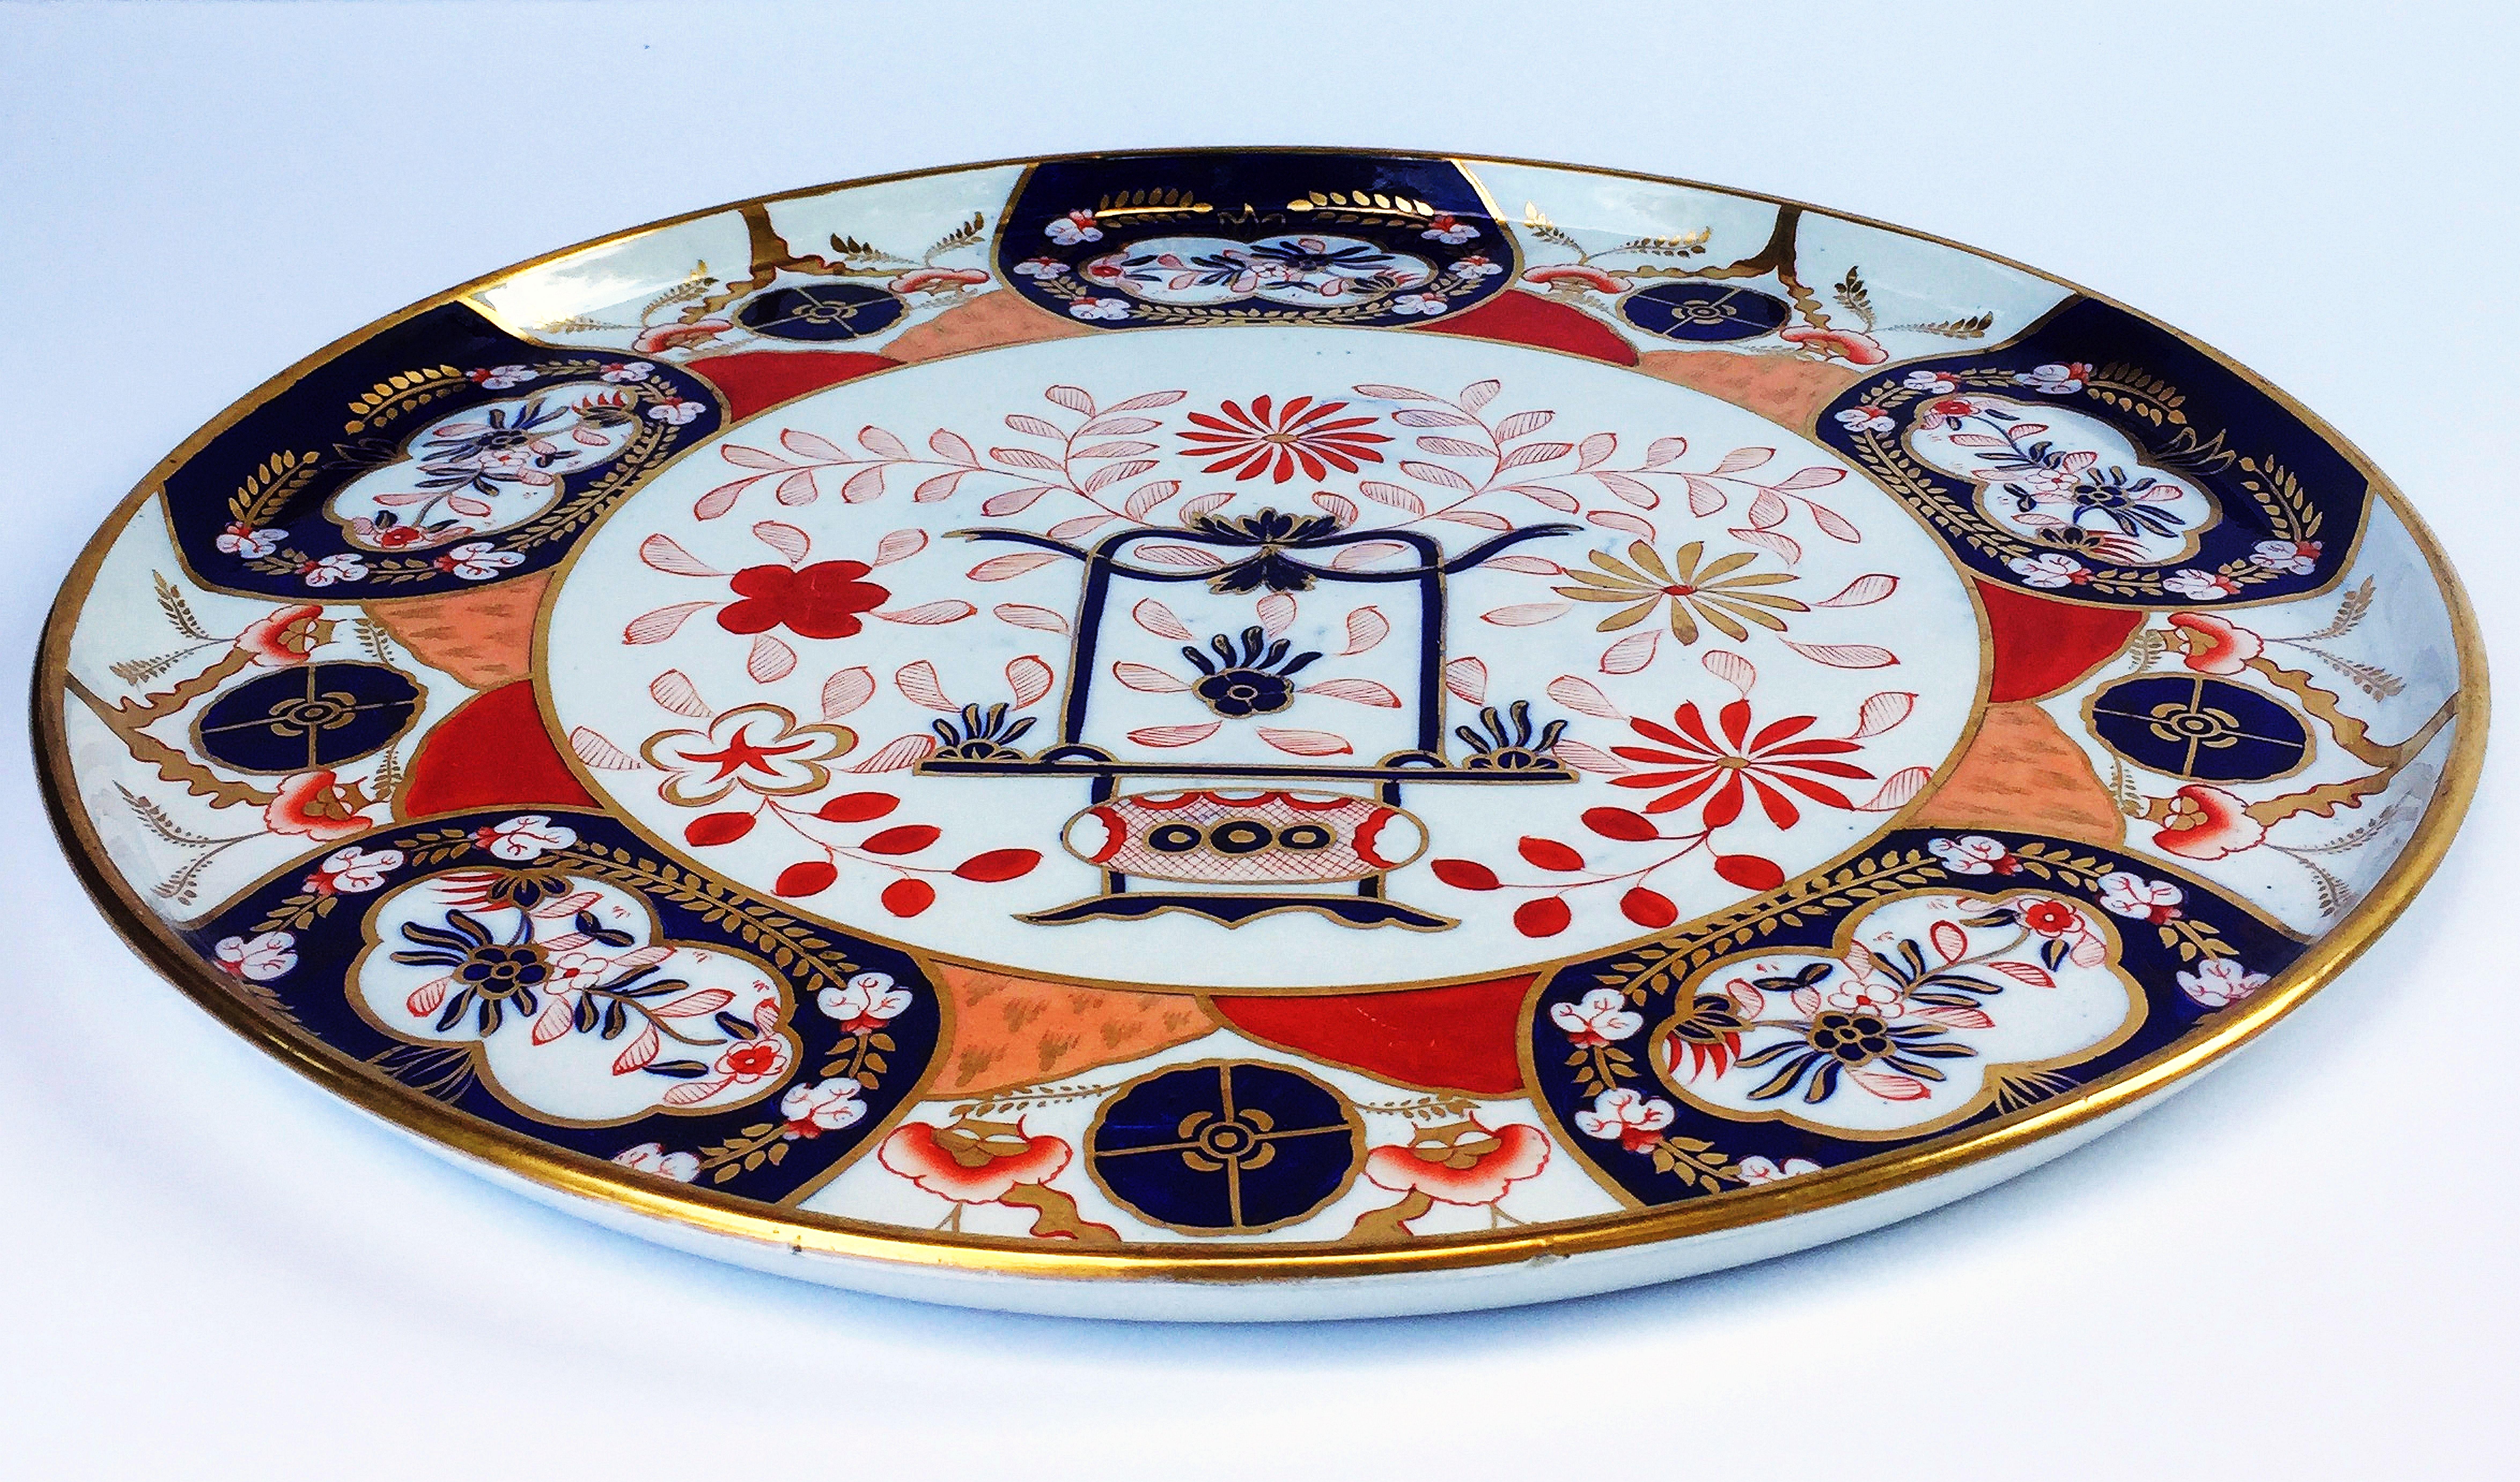 A large English Imari polychrome charger or round tray with raised edge around the circumference by the celebrated pottery firm, Copeland, c 1850 -1867, featuring a stylized Japonisme foliate design in blues and reds with gilt accents.

Impressed